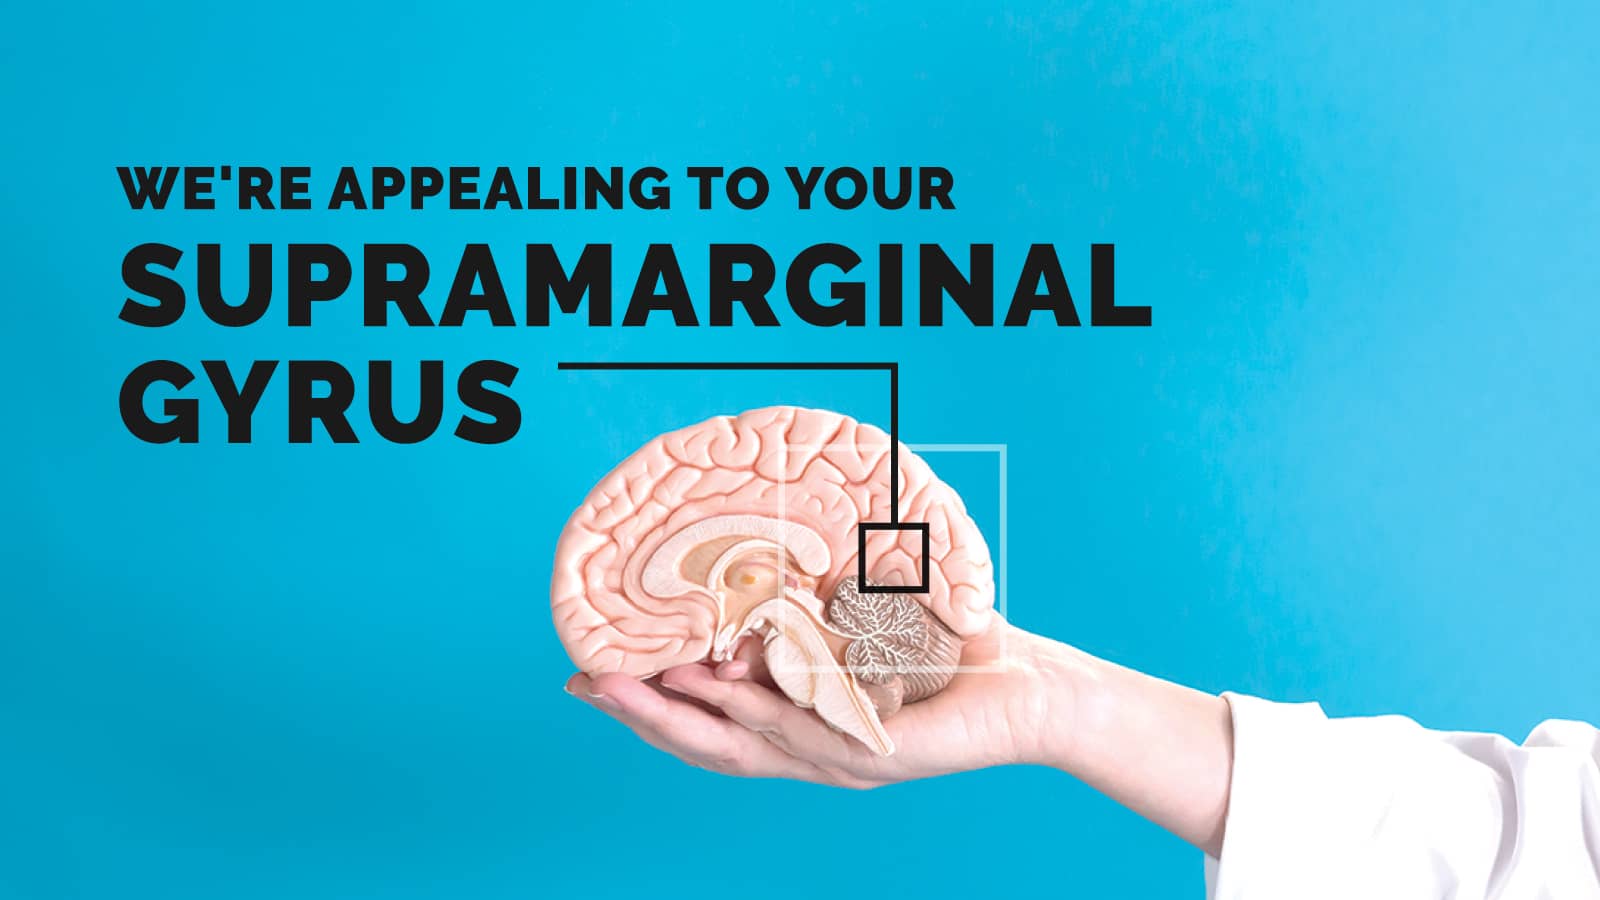 a hand holding a model of a humain brain - Use your supramarginal gyrus